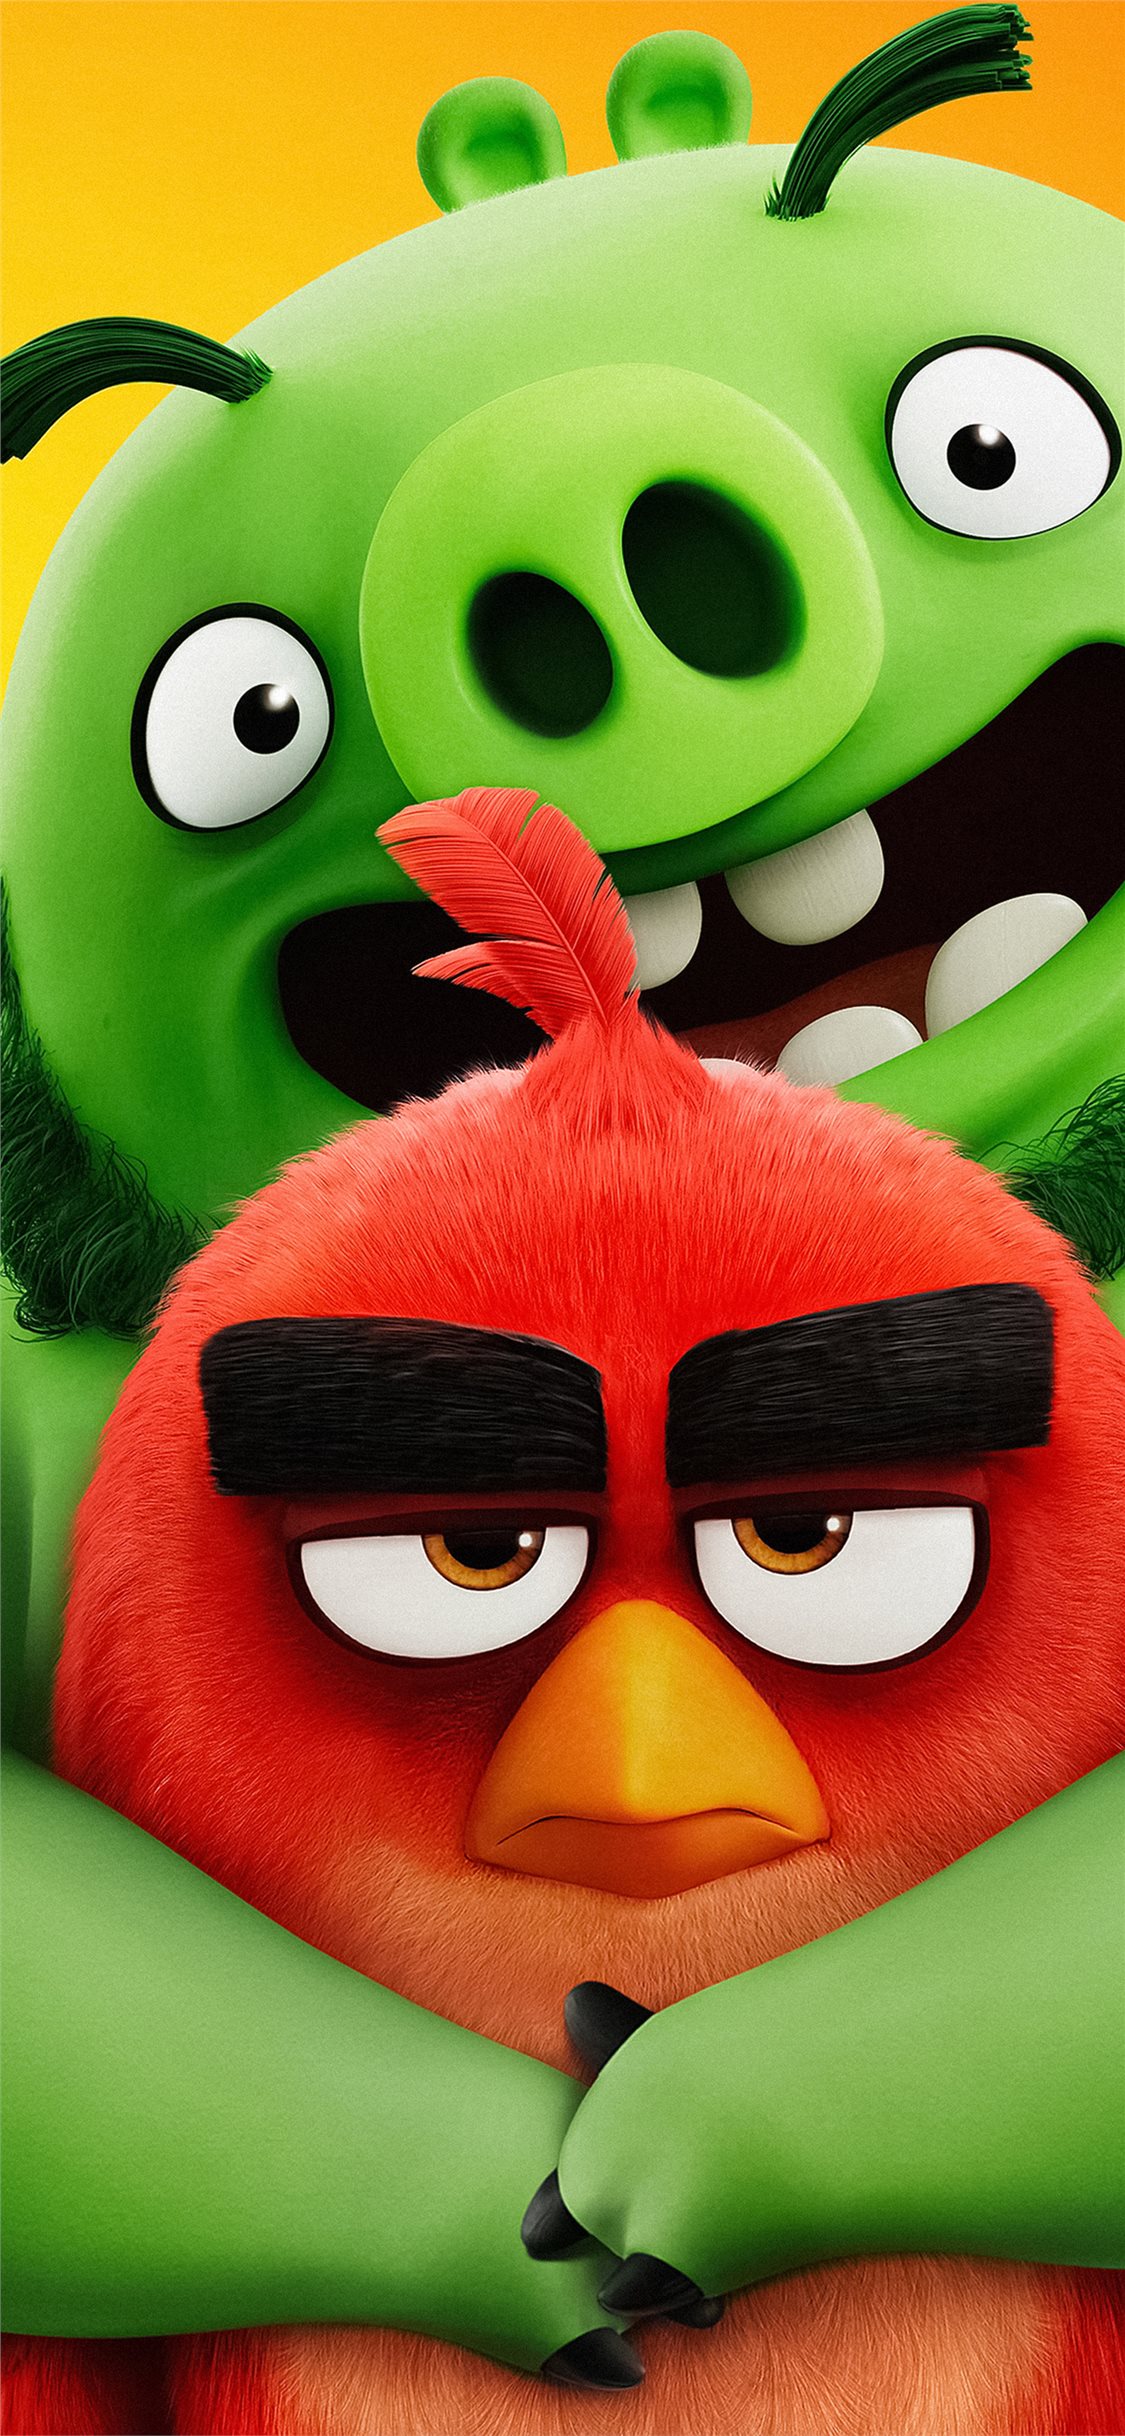 Angry Birds 2 Movie Wallpapers